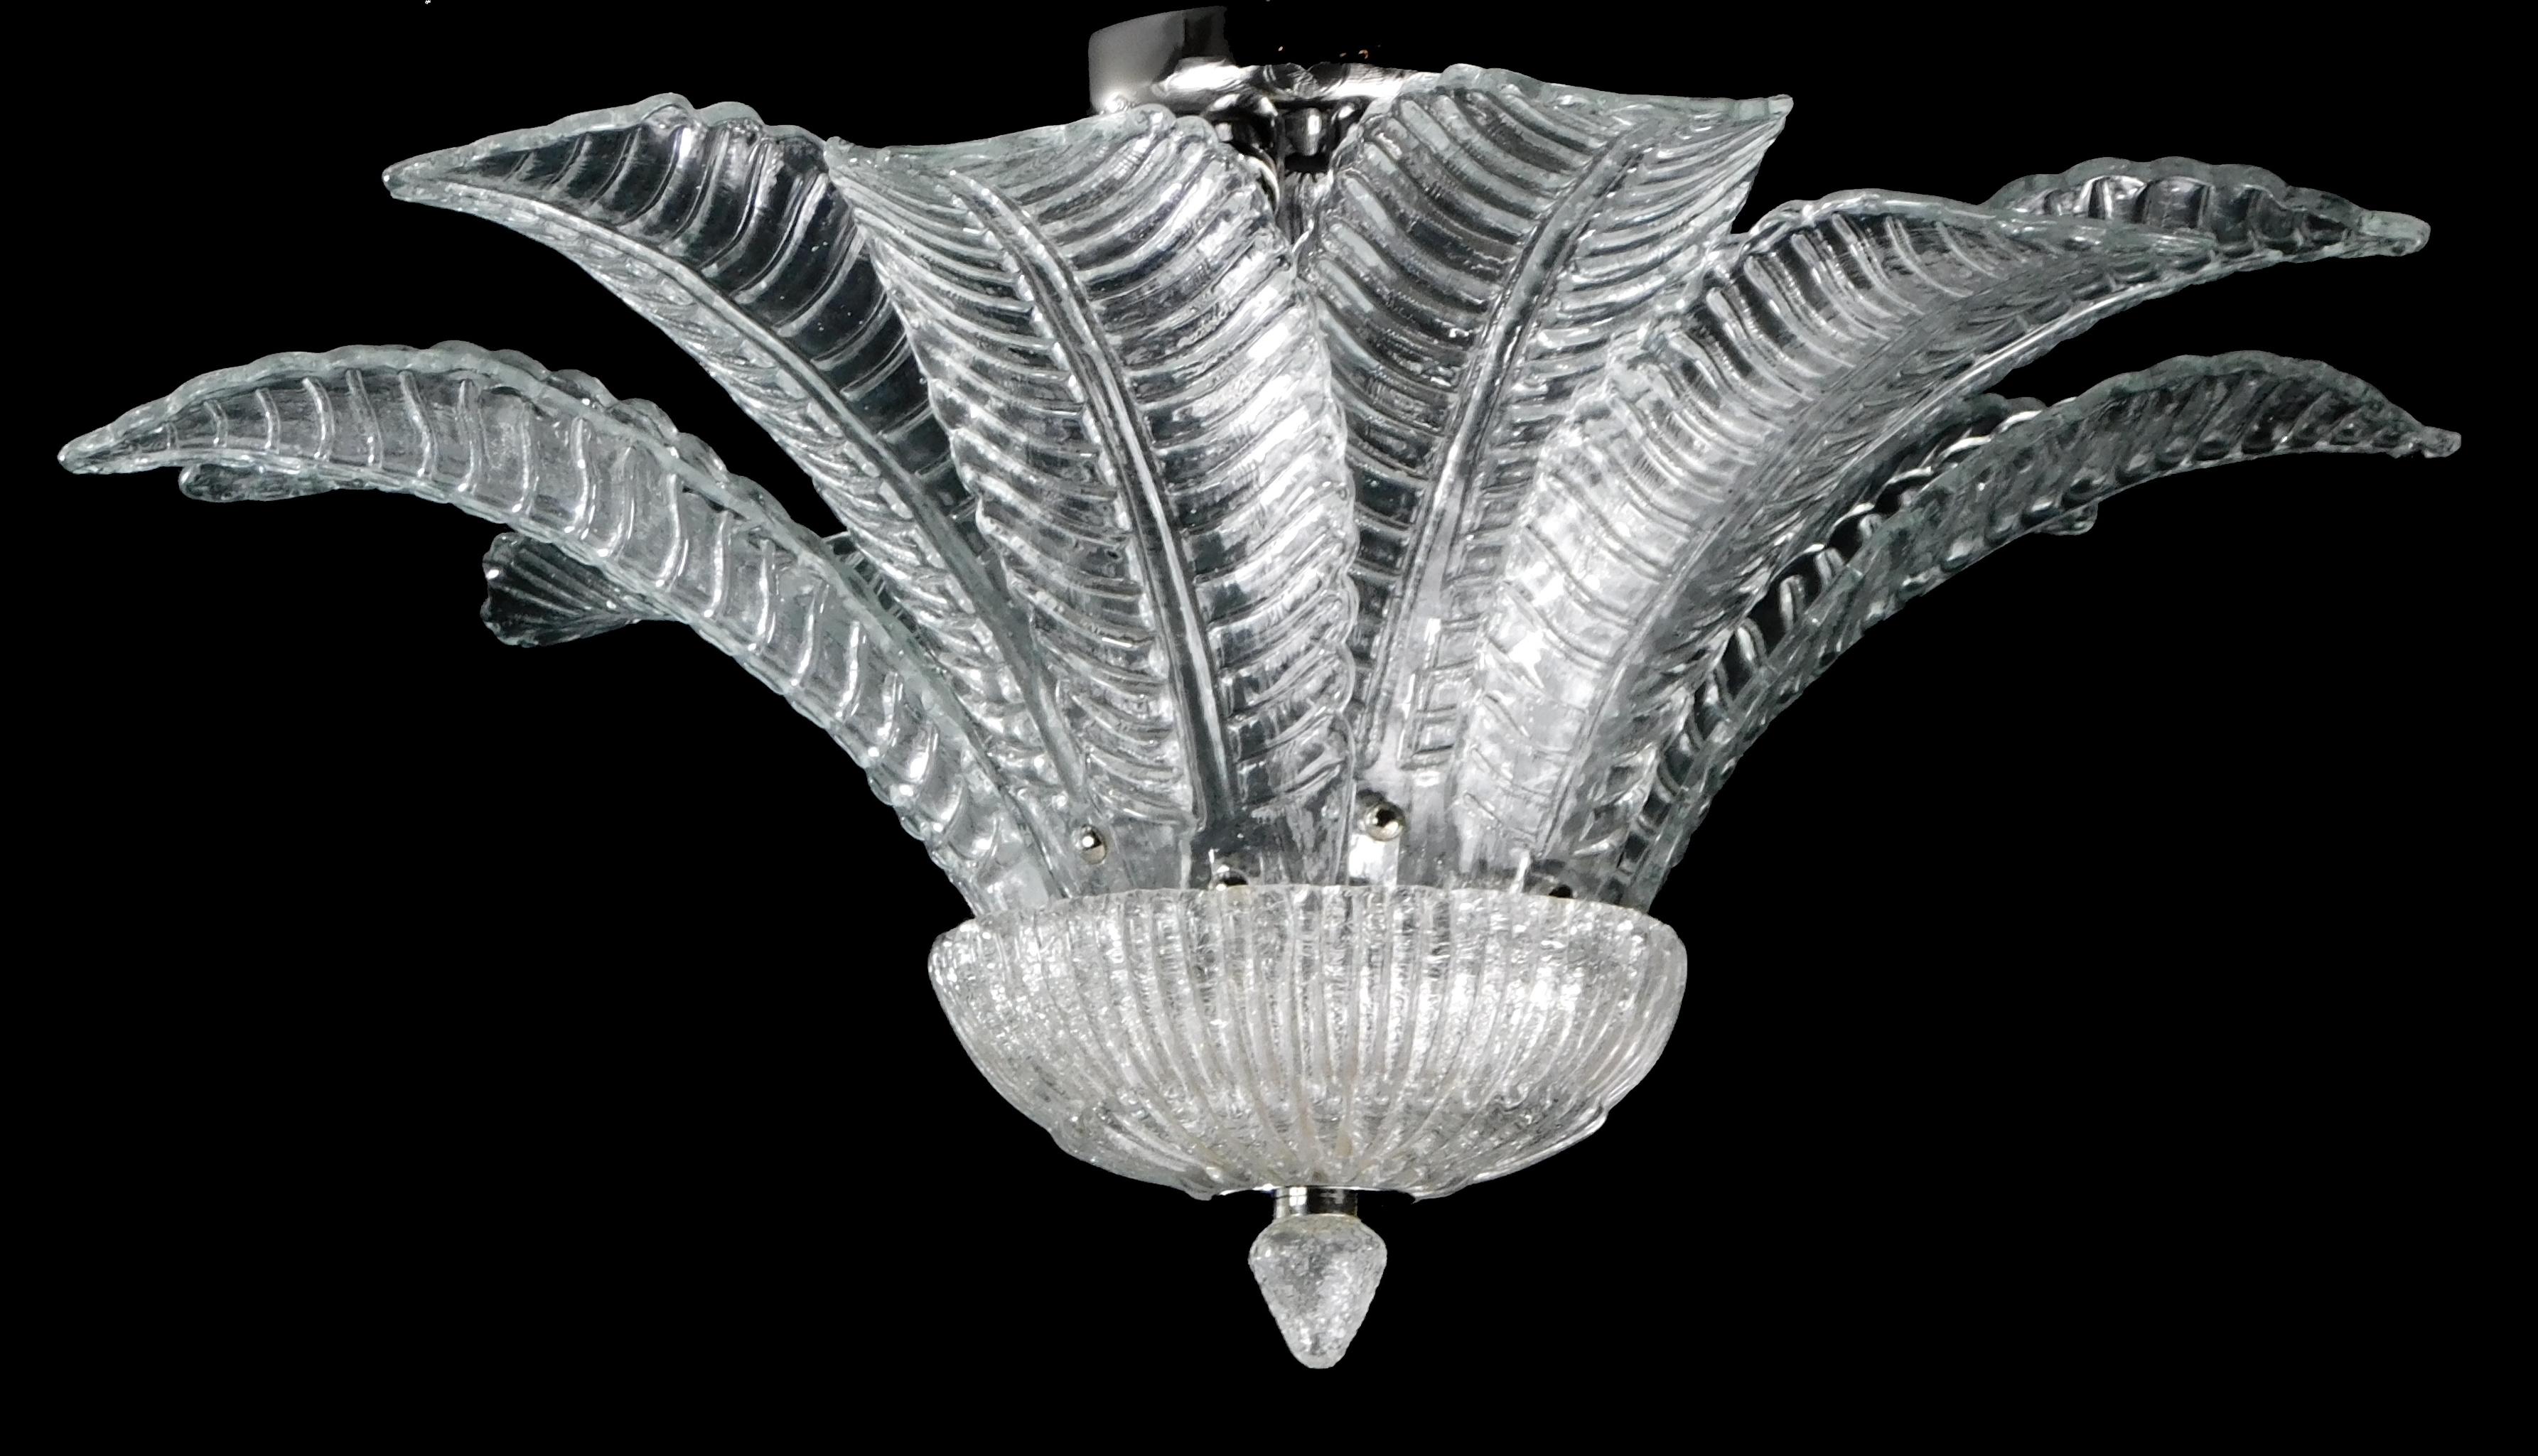 Italian flush mount with clear hand blown murano Felci fern glass leaves mounted on chrome finish metal frame by Fabio Ltd / made in Italy
6 lights / E12 or E14 type / max 40W each
Measures: Diameter 27.5 inches, height 14 inches
Order only / this